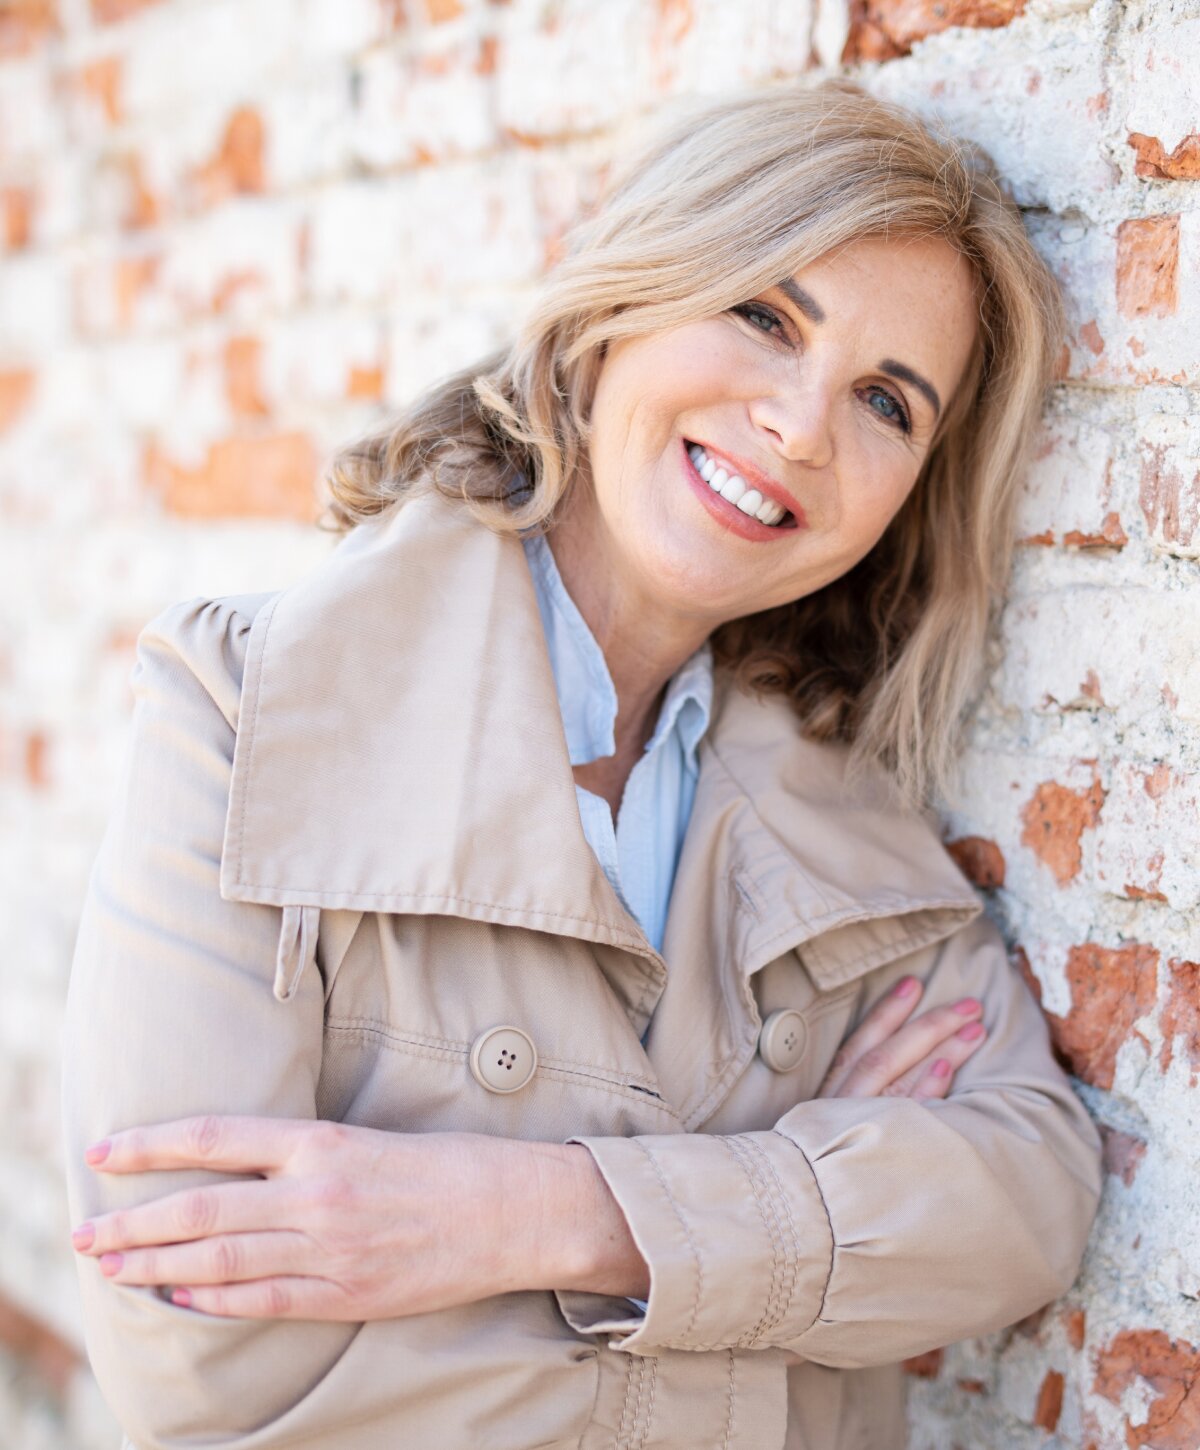 Nashville facial fat grafting model leaning on wall and smiling